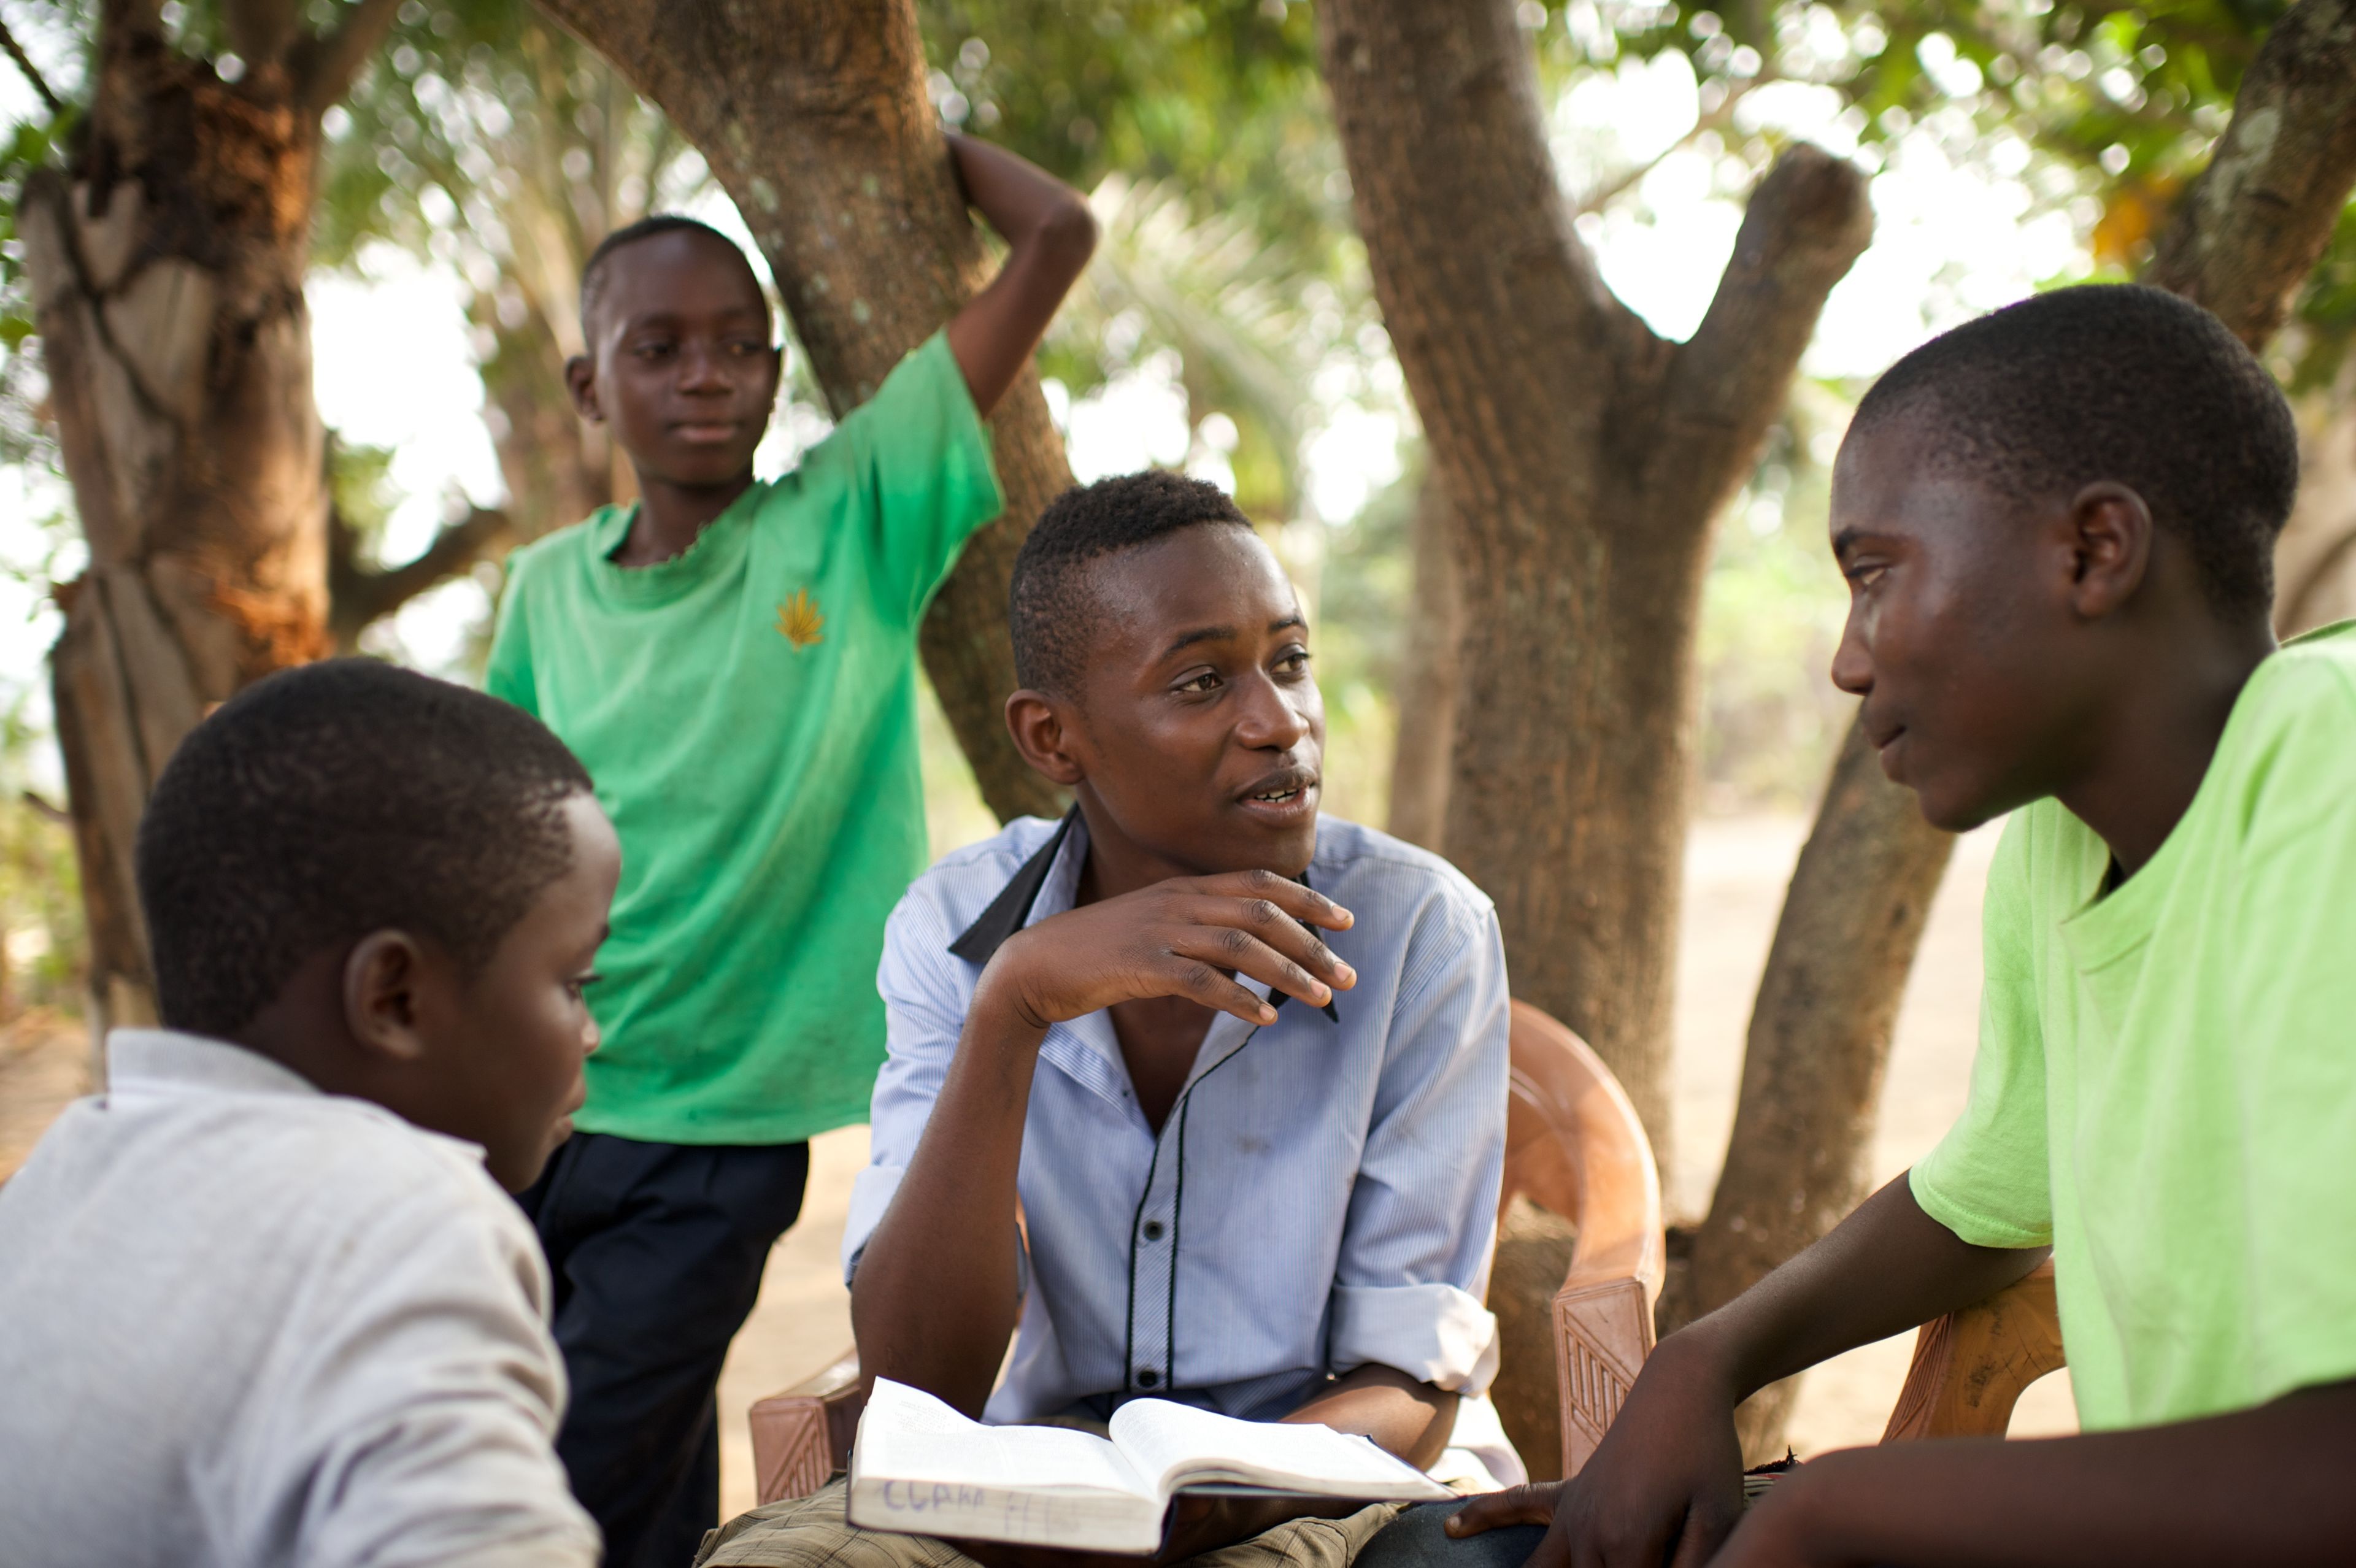 A group of young men studying the scriptures together.